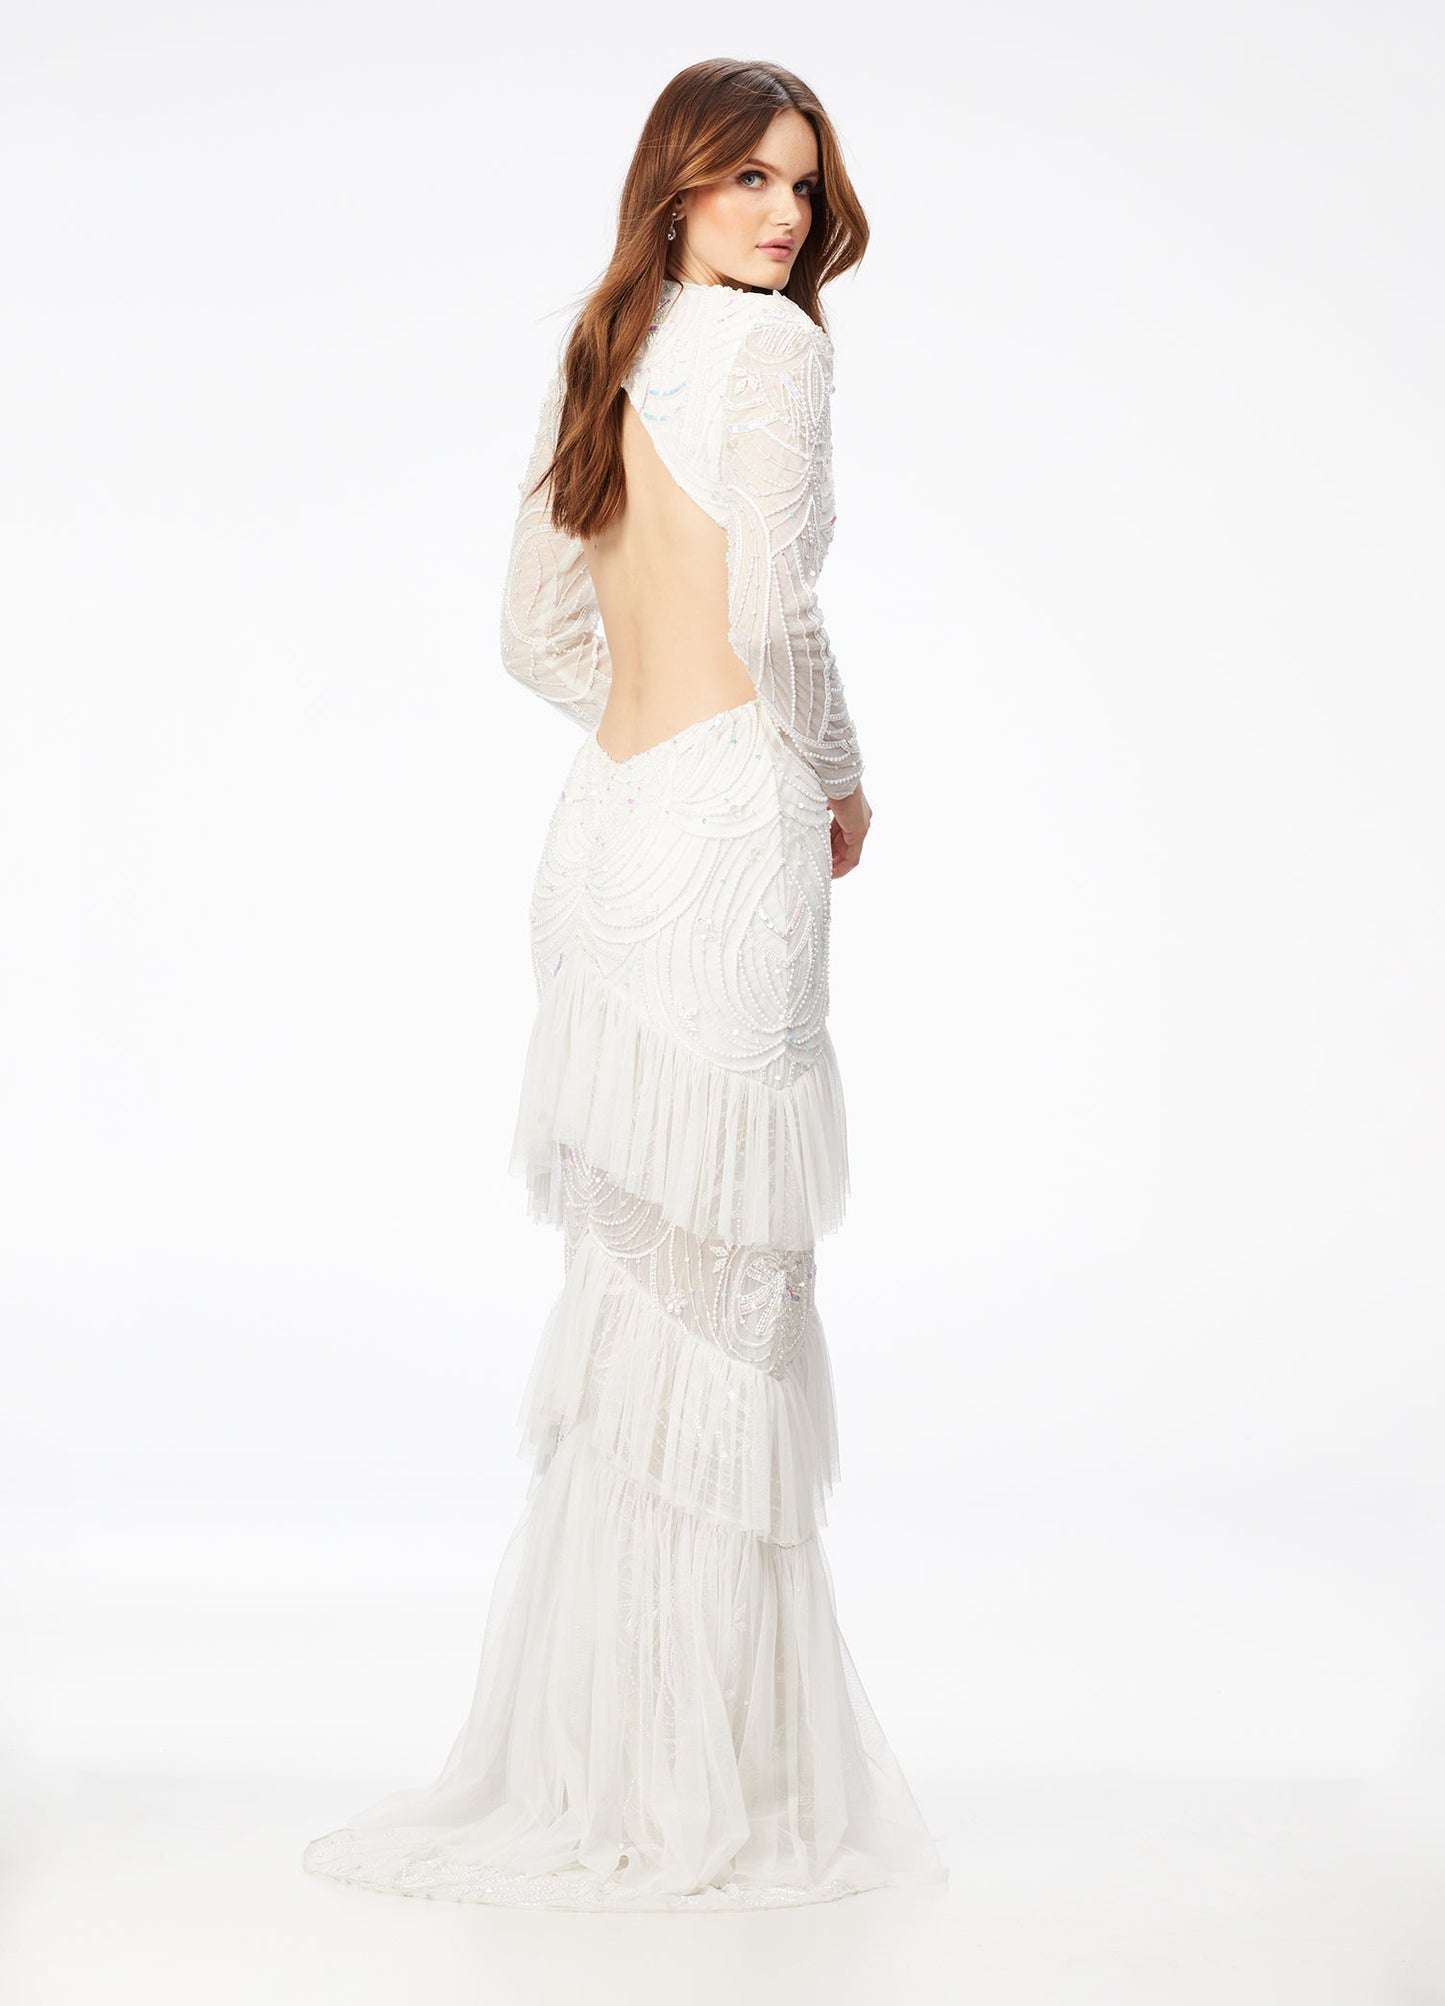 Ashley Lauren 11199 Bring the drama in this v neckline beaded evening gown featuring sleeves and ruffles. The gown is perfectly accented by a center slit and a sweep train.  Available colors:  Ivory, Neon Blue